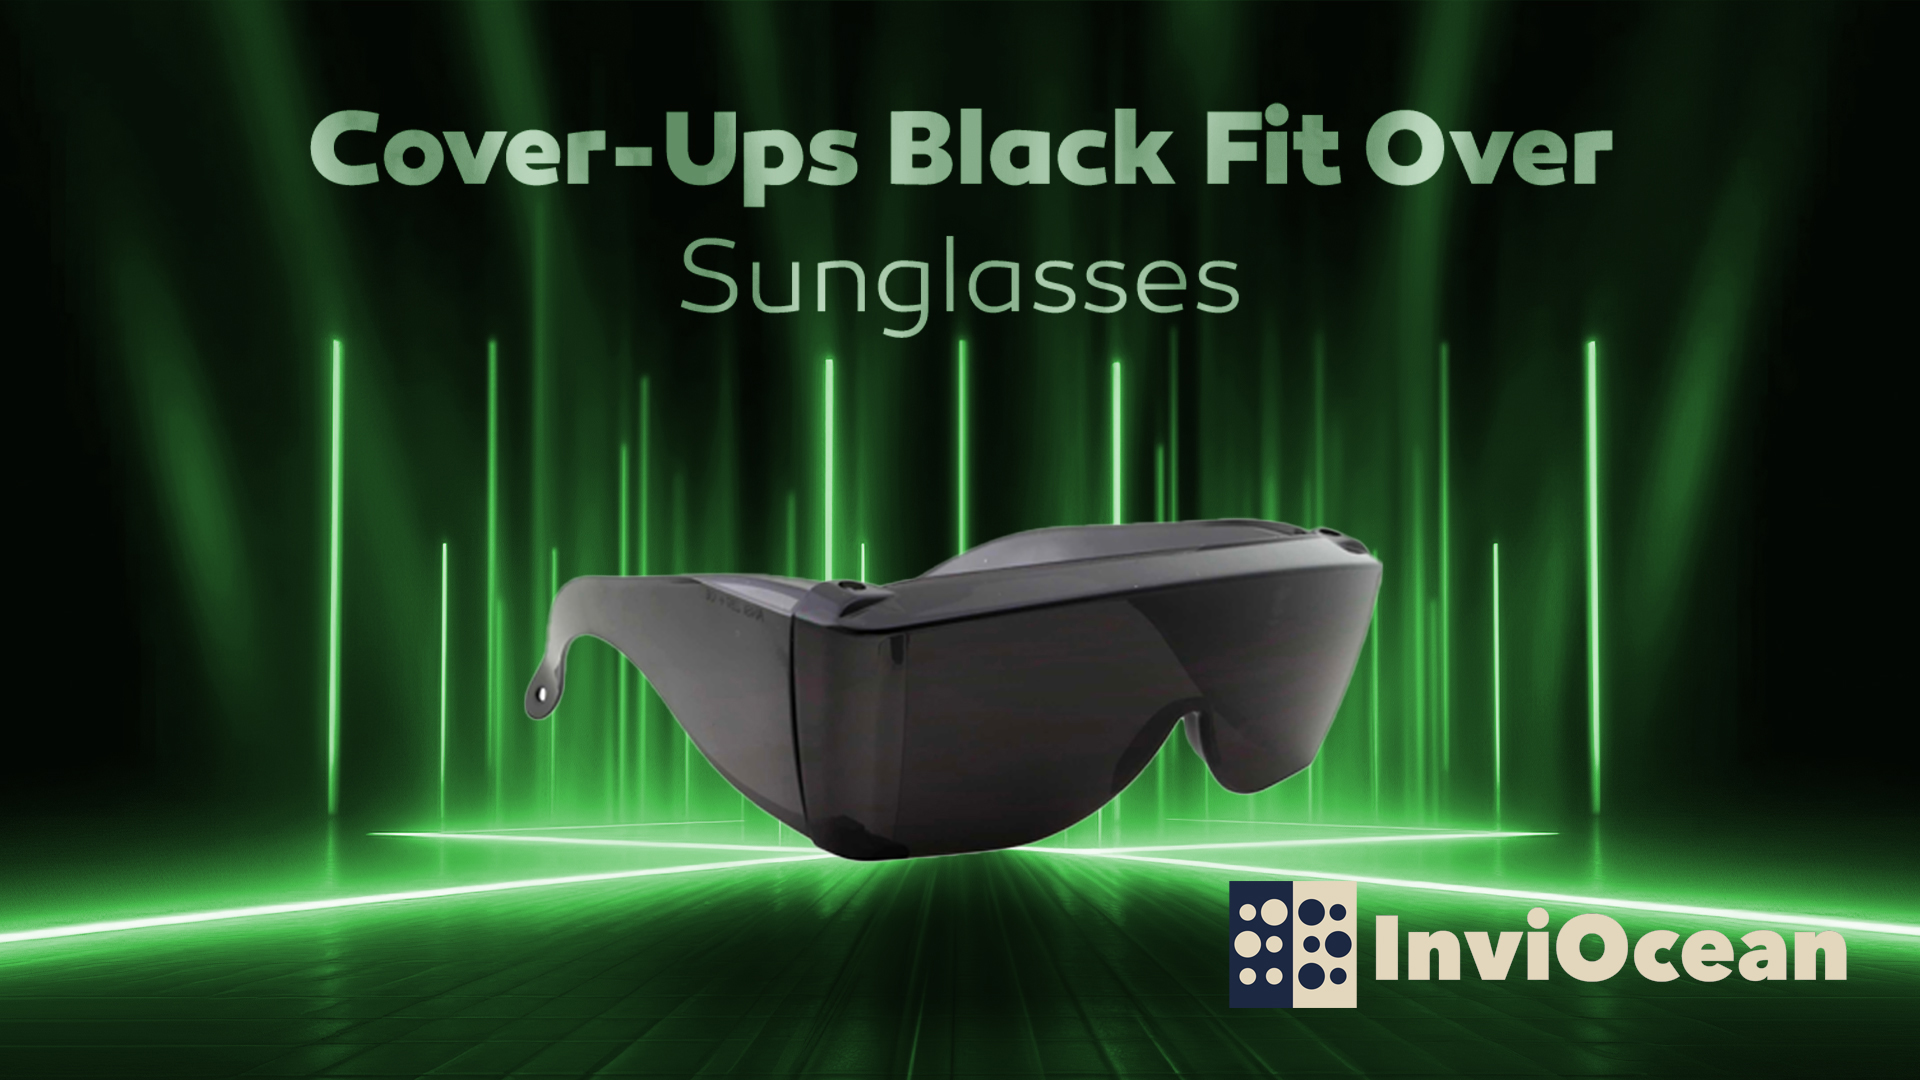 Cover-Ups Black Fit Over Sunglasses